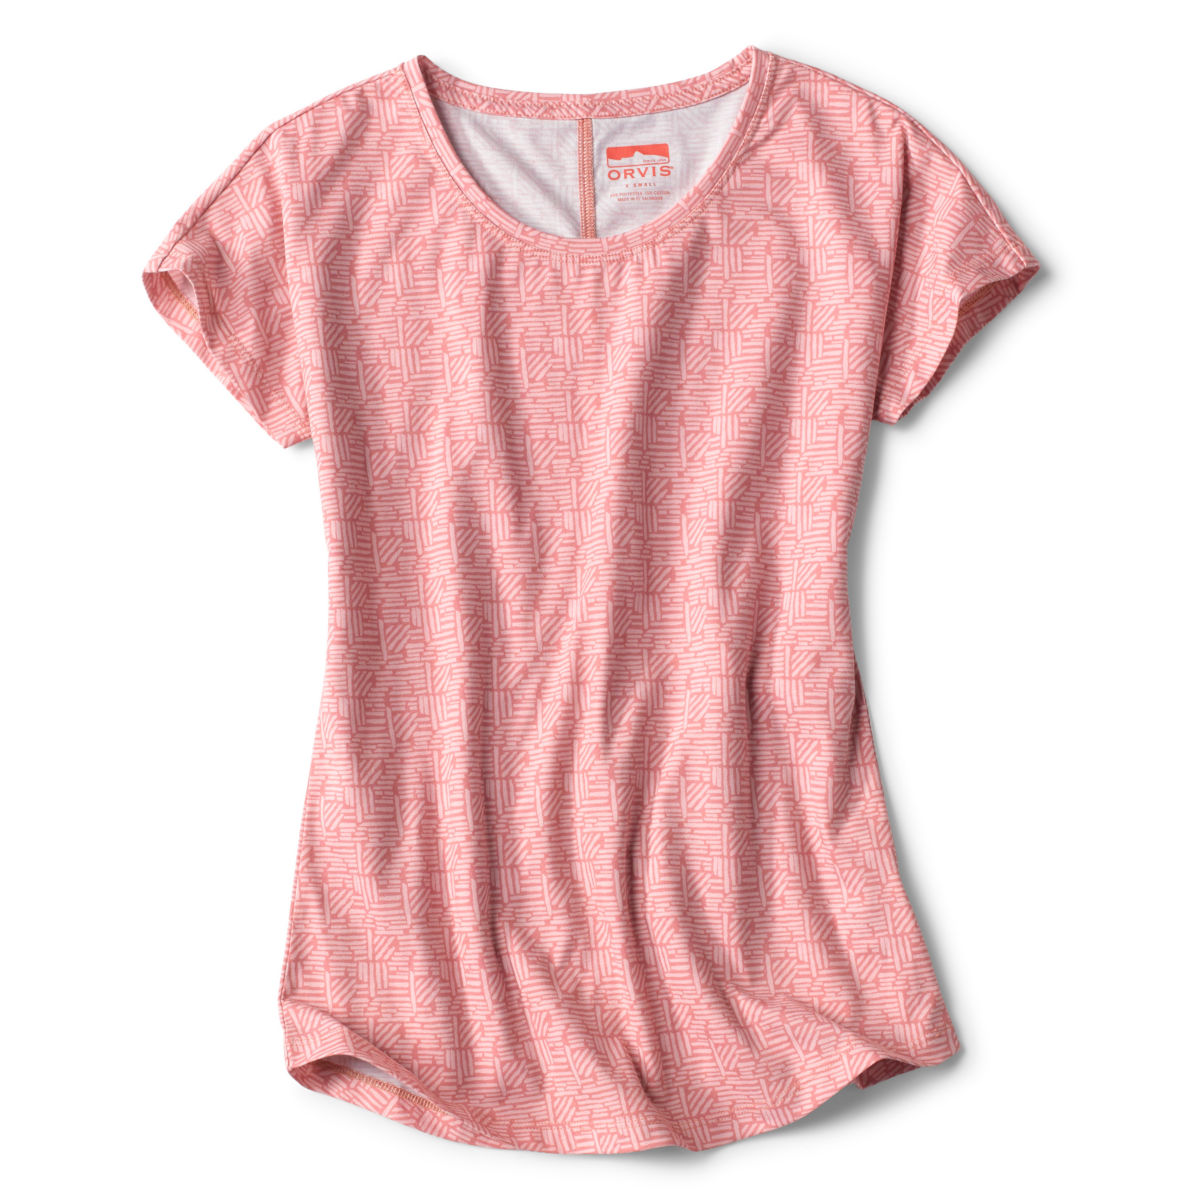 Women's drirelease® Printed Dolman Tee - CLAY ABSTRACTimage number 0